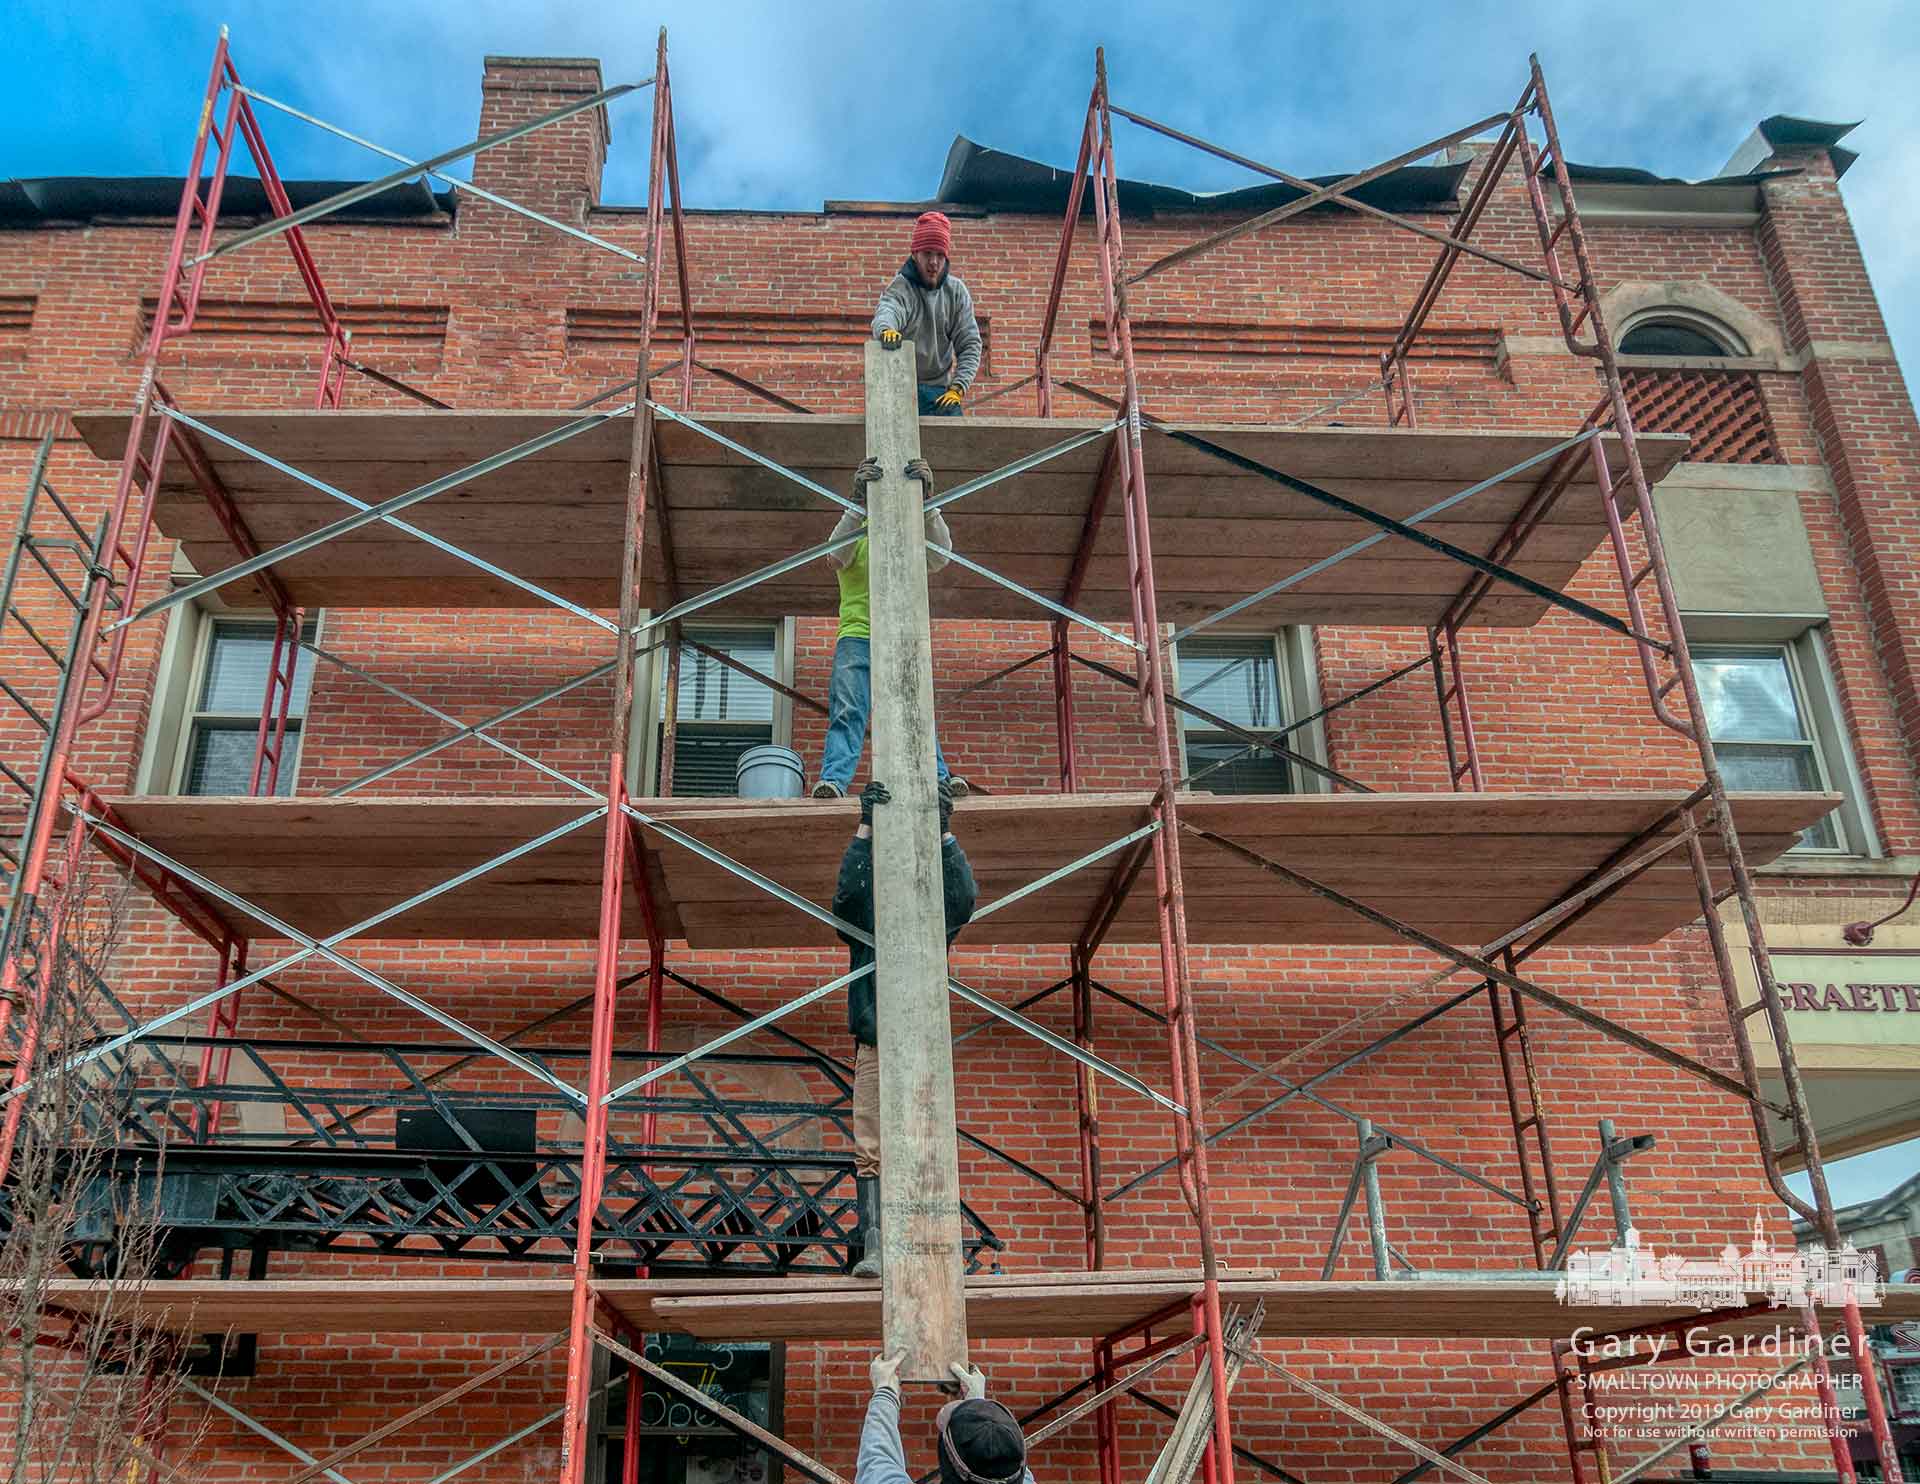 Workers remove the scaffolding erected in July 2018 at the building housing Graeter's to restore the facade to what it looked like about 50 years ago. My Final Photo for March 9, 2019.